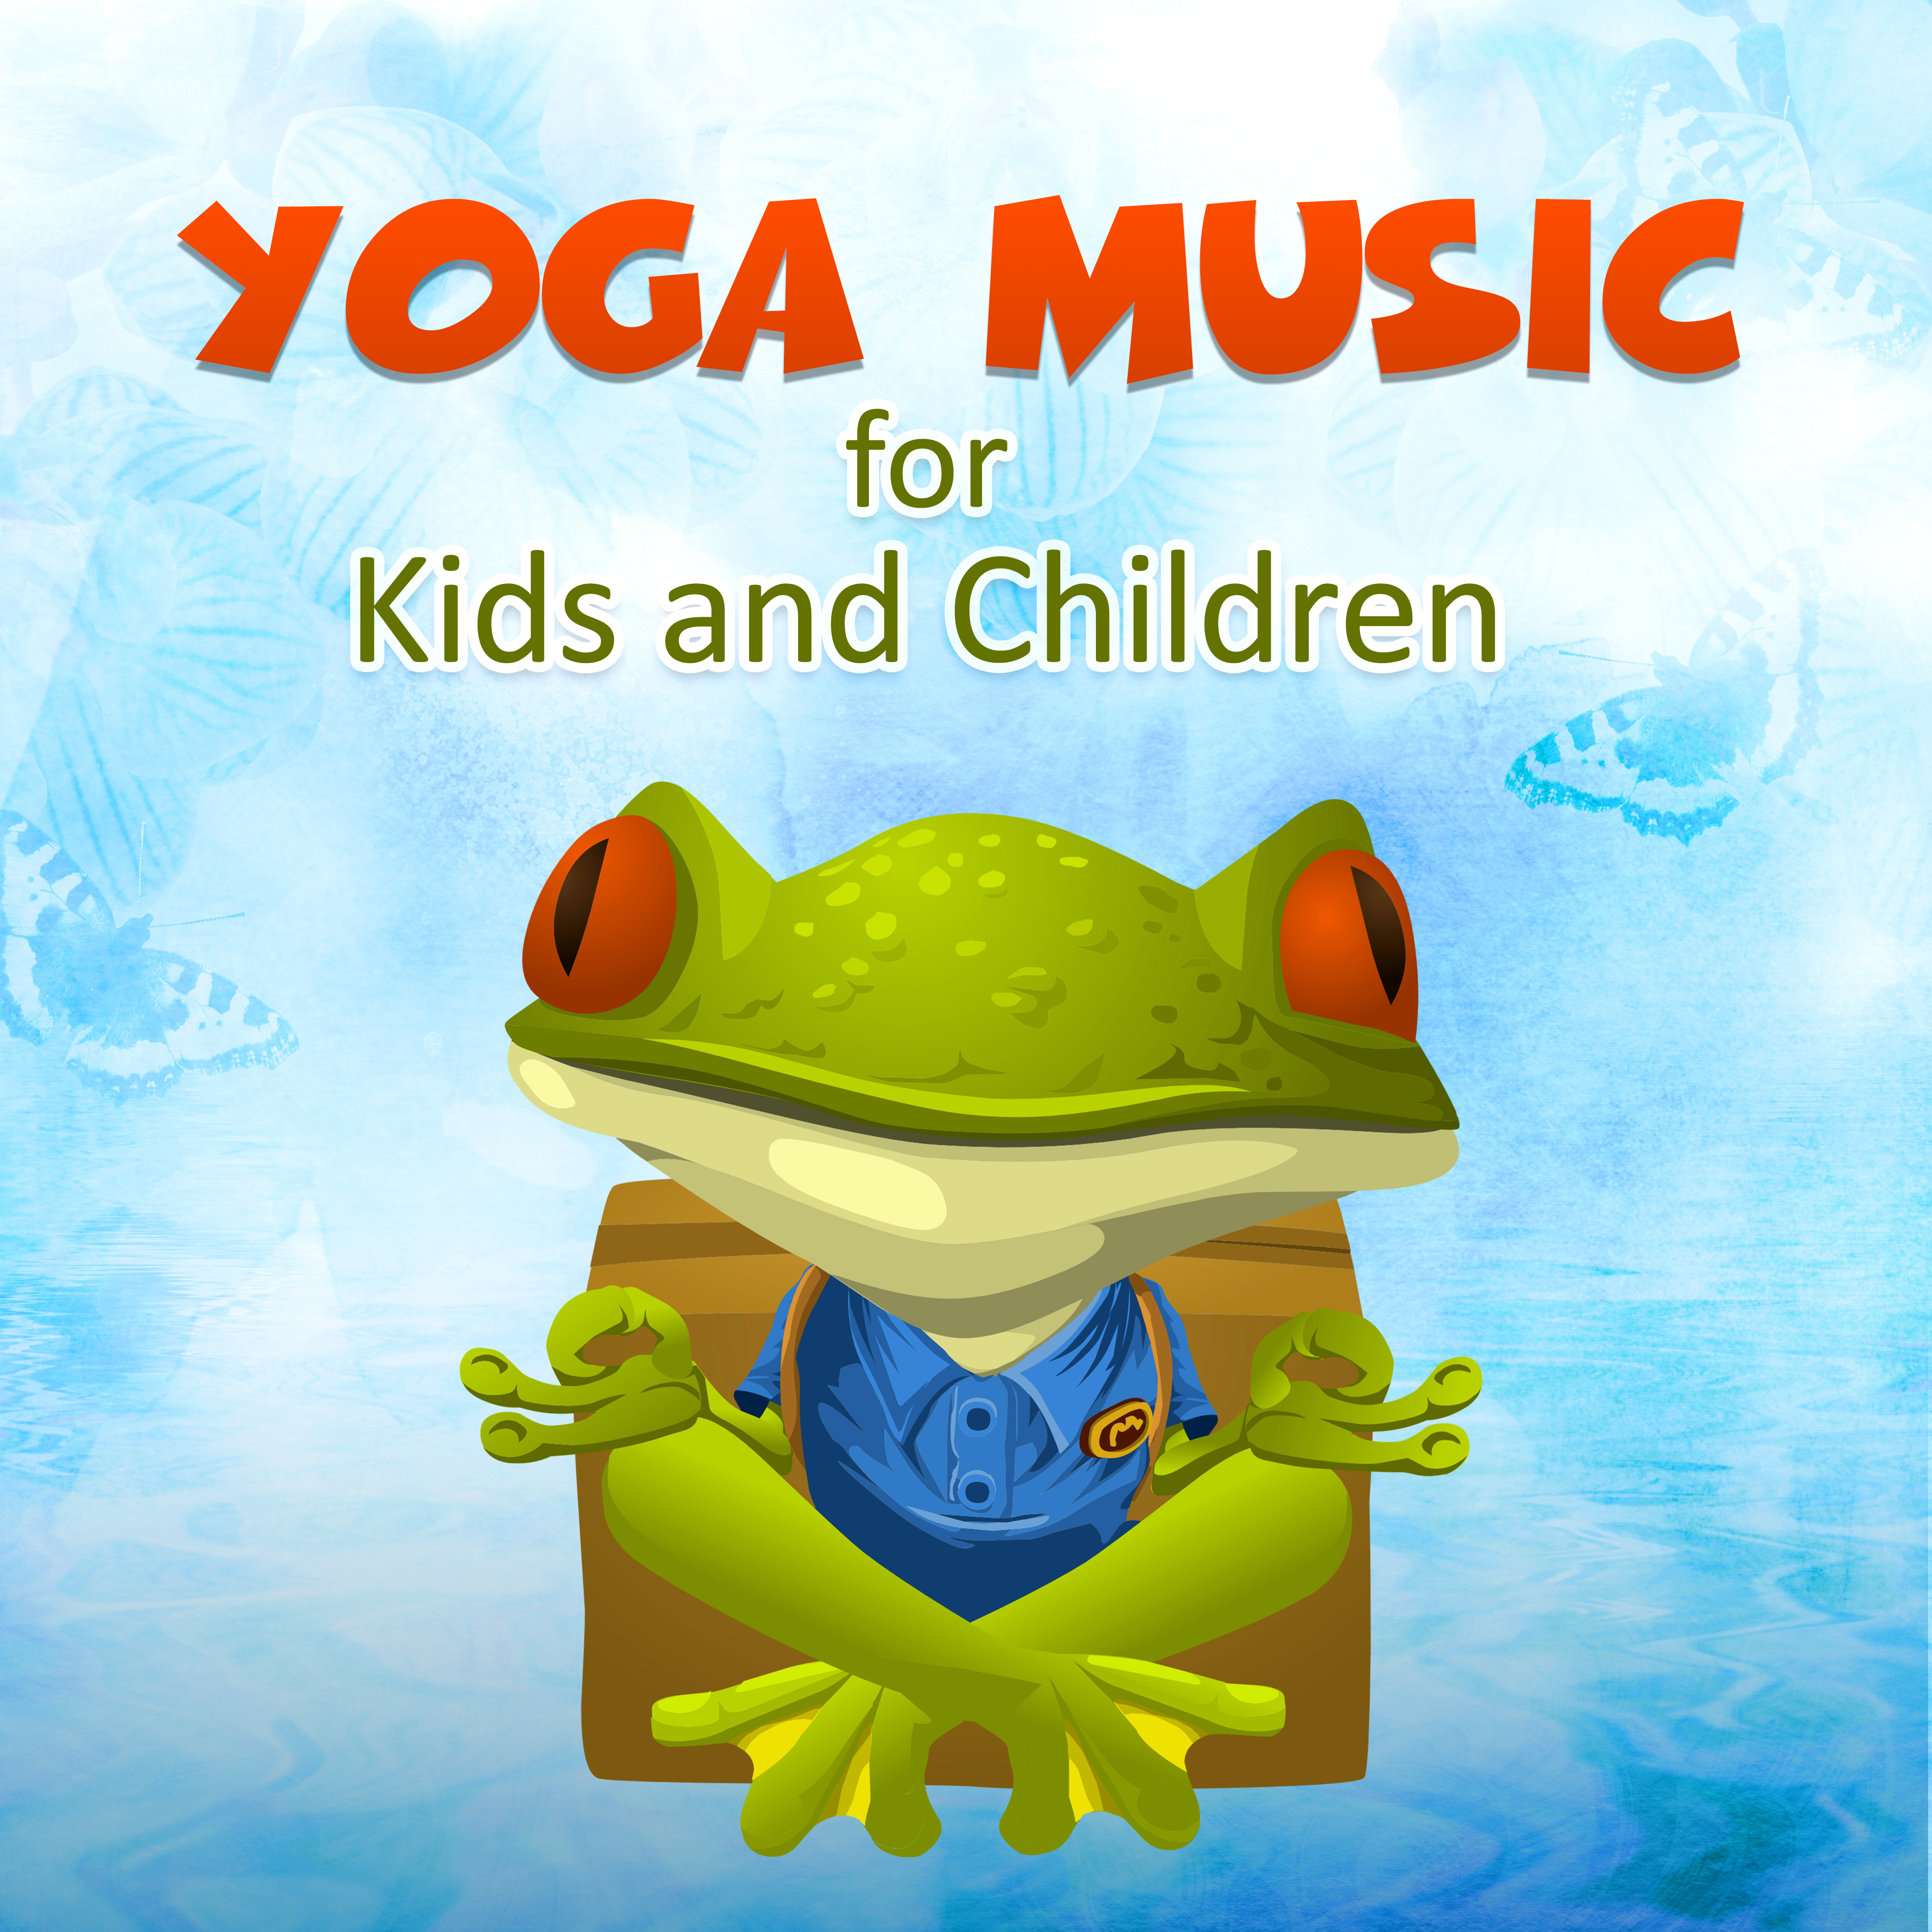 Yoga Music for Kids and Children  Baby Yoga Soothing Sounds for Relaxation Meditation, Nature Sounds to Calm Down a Child, Prenatal Pregnancy Yoga Background Music